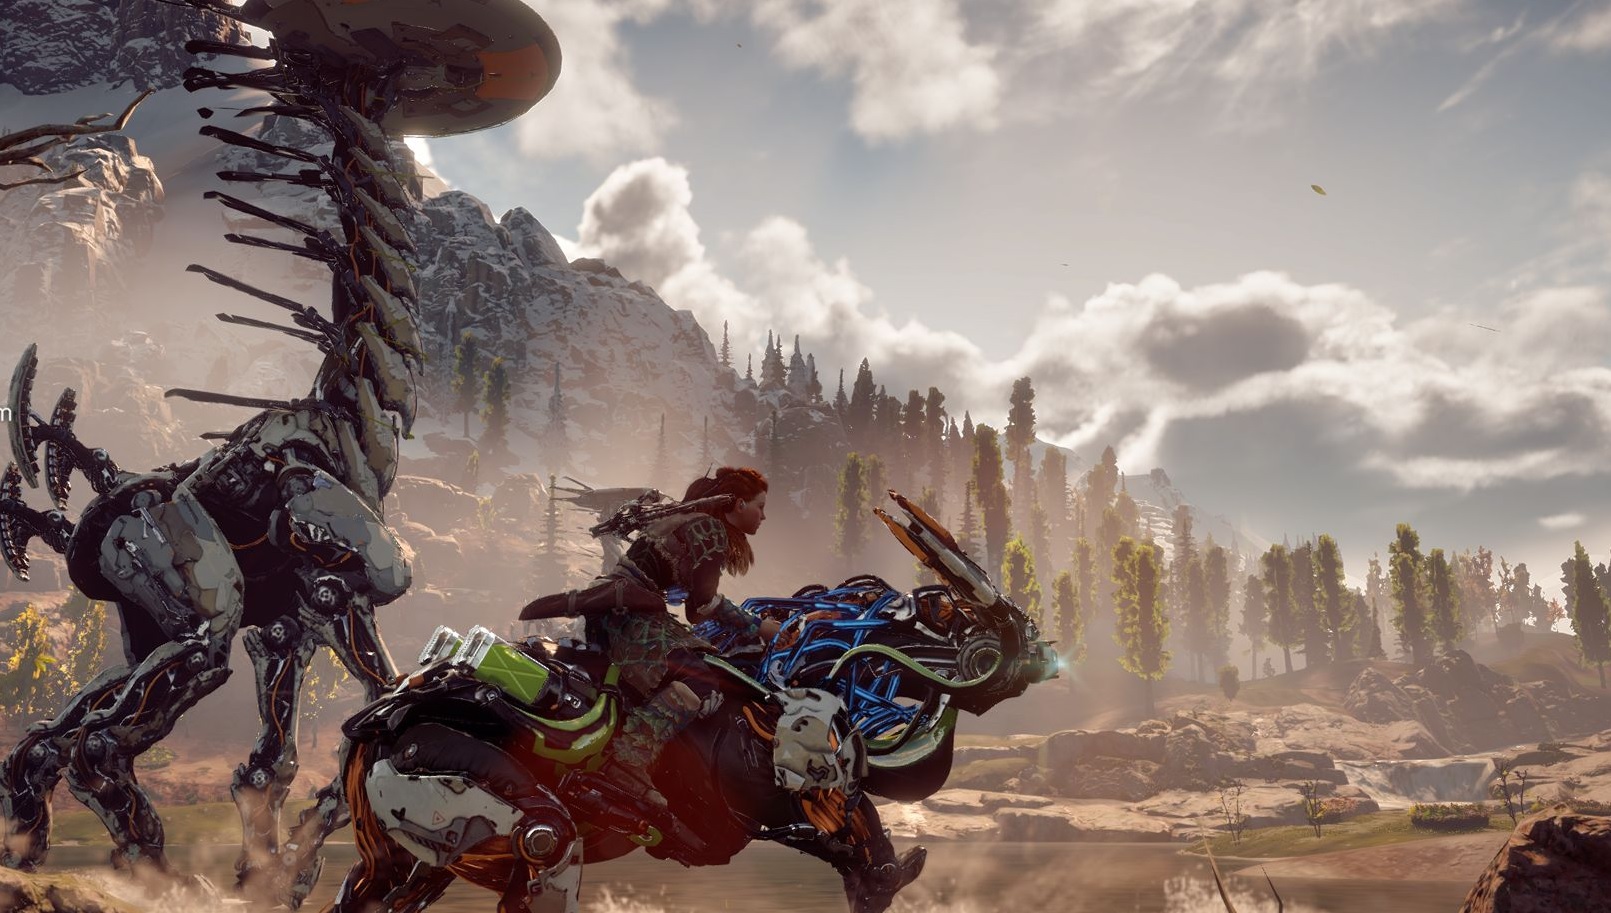 Horizon Zero Dawn's PC release: the end of the exclusive as we know it -  Polygon